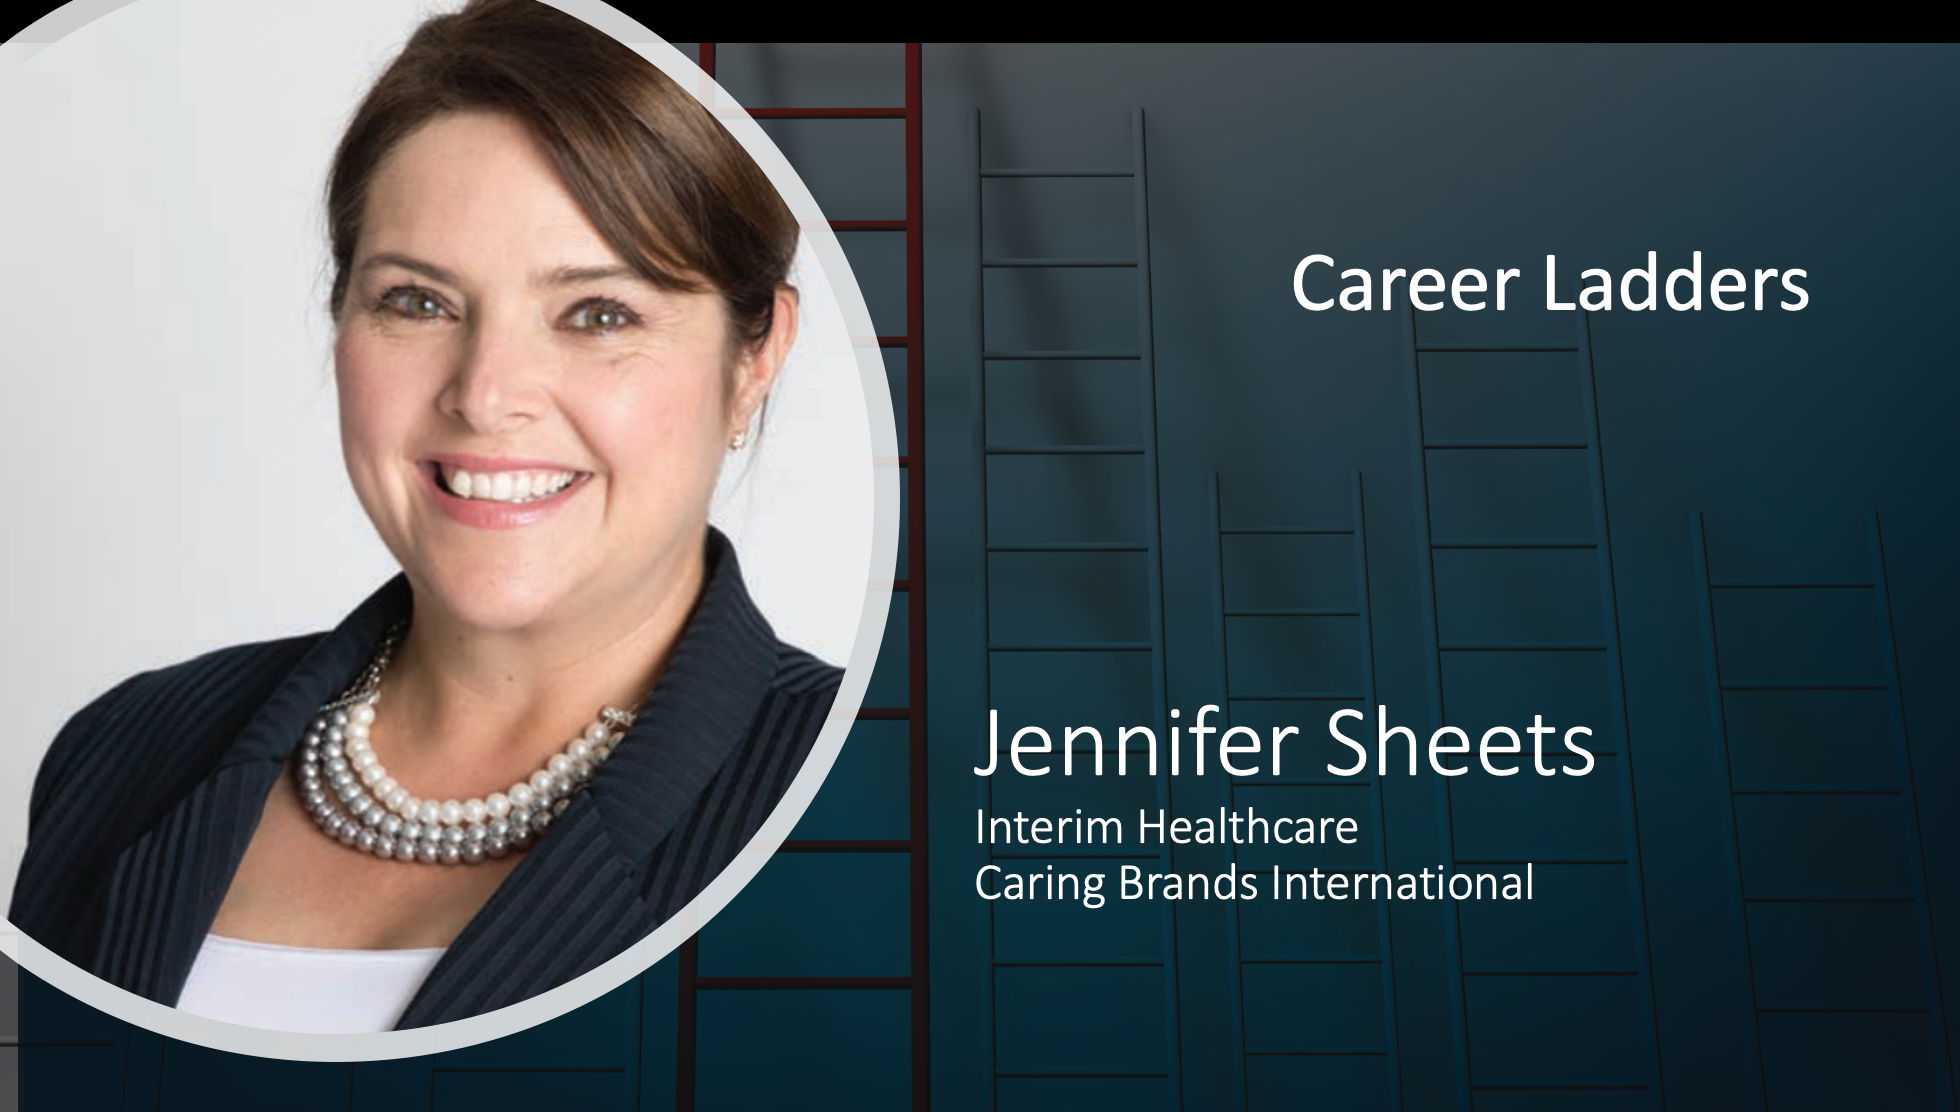 Jennifer Sheets, Interim Healthcare and Caring Brands International: Deadly Hospital Error Leads to a Commitment to Quality